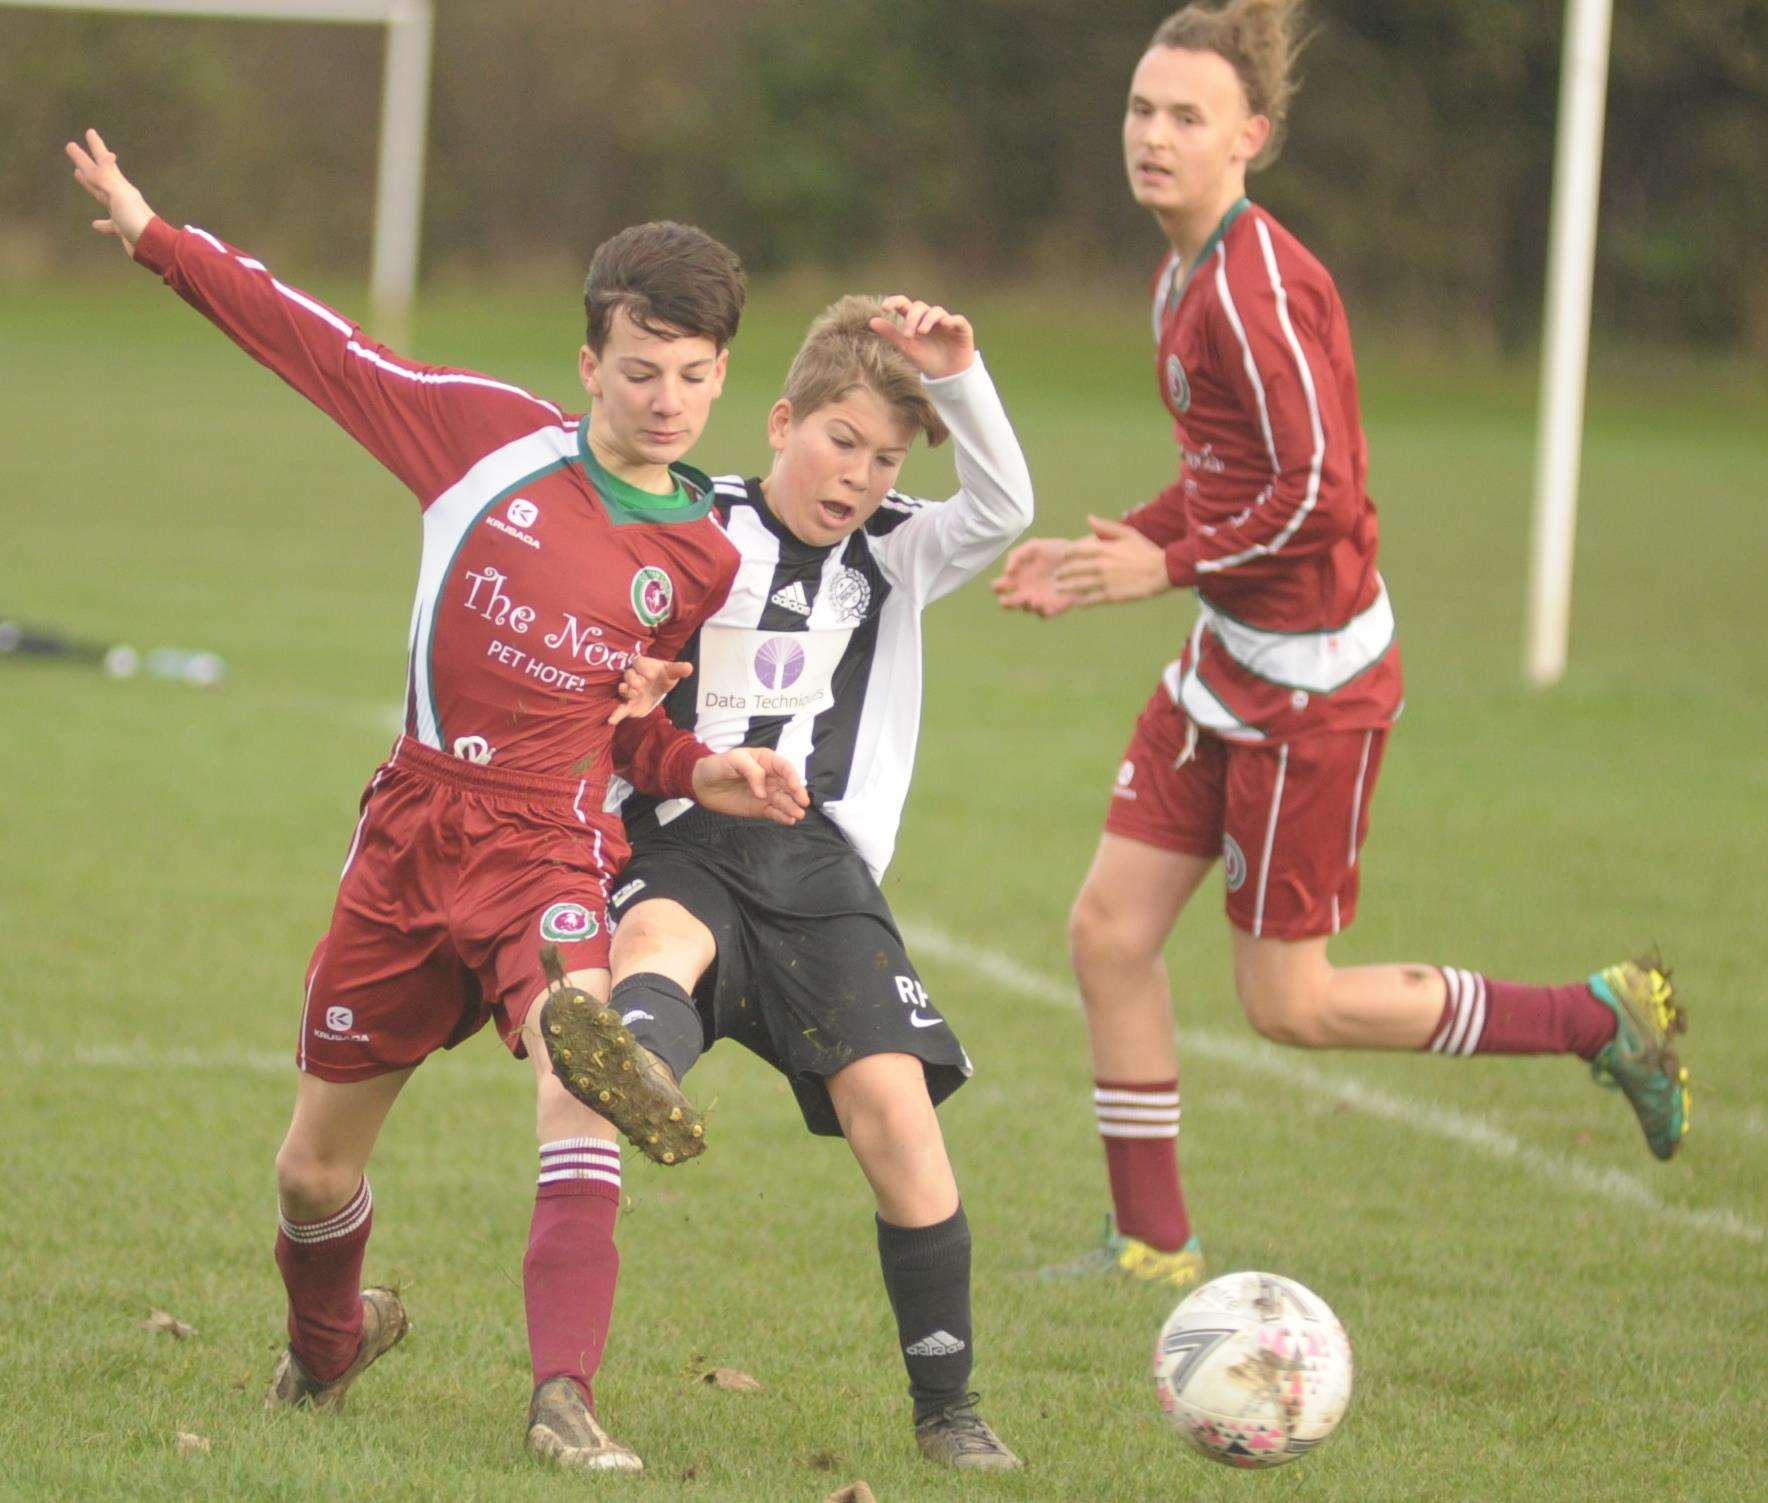 Under-15 sides Real 60 Lynx (stripes) and Cobham Colts battle for the points in Division 2 Picture: Steve Crispe